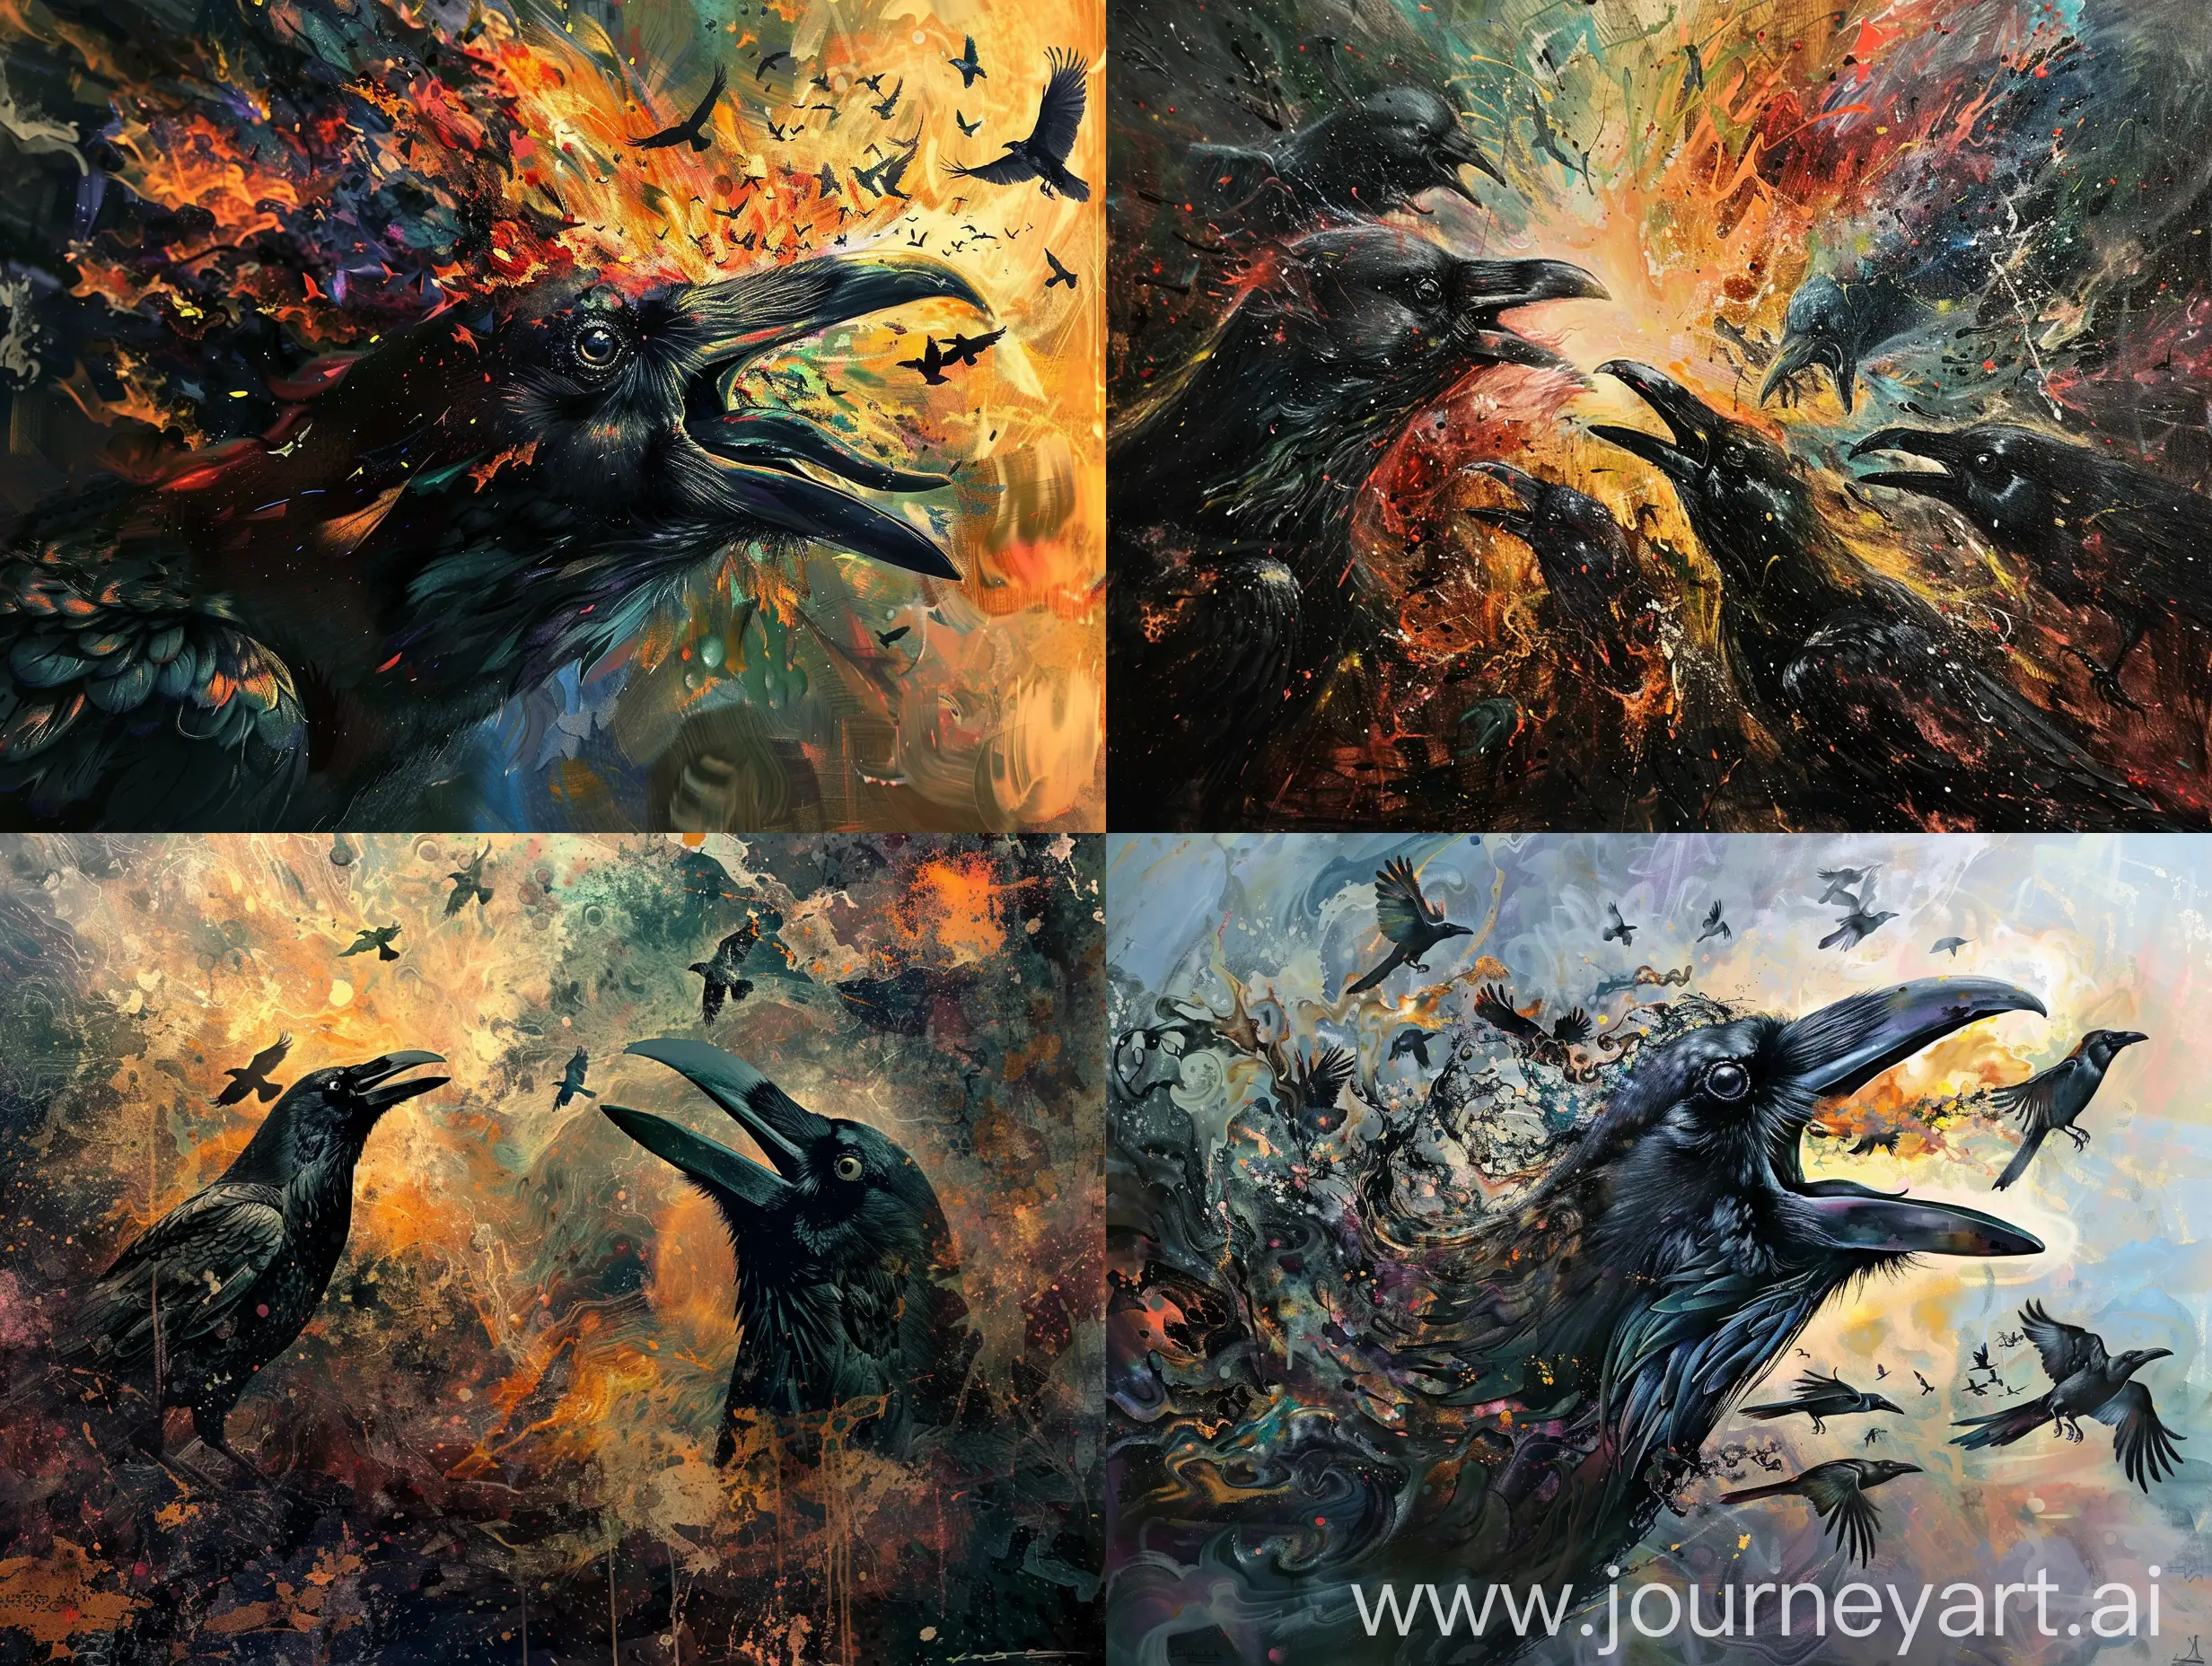 my mind is on drugs and exploding into a tapestry of monstrous ravens. in the style of vividly emotional impactful art, dark expressionism and dark impressionistic artwork